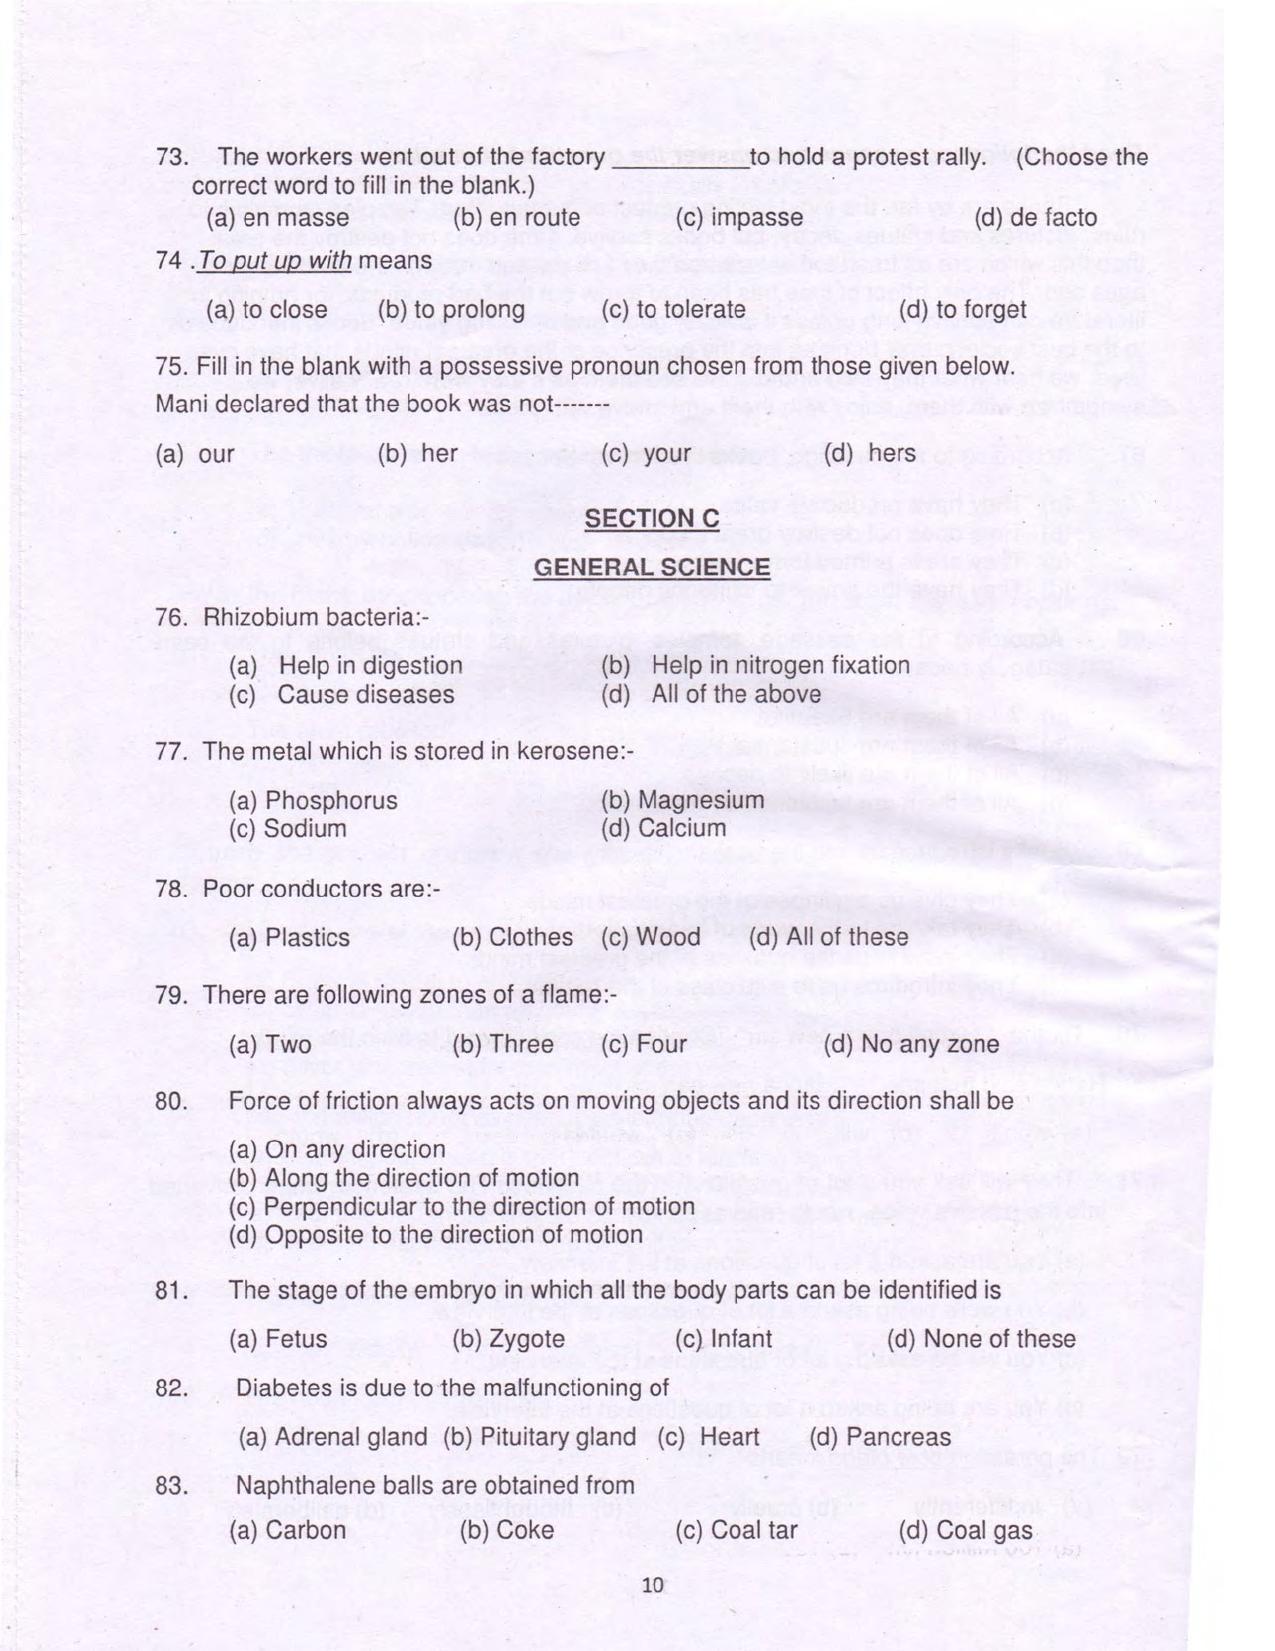 AISSEE Class 9 Sample Question Paper - Page 10